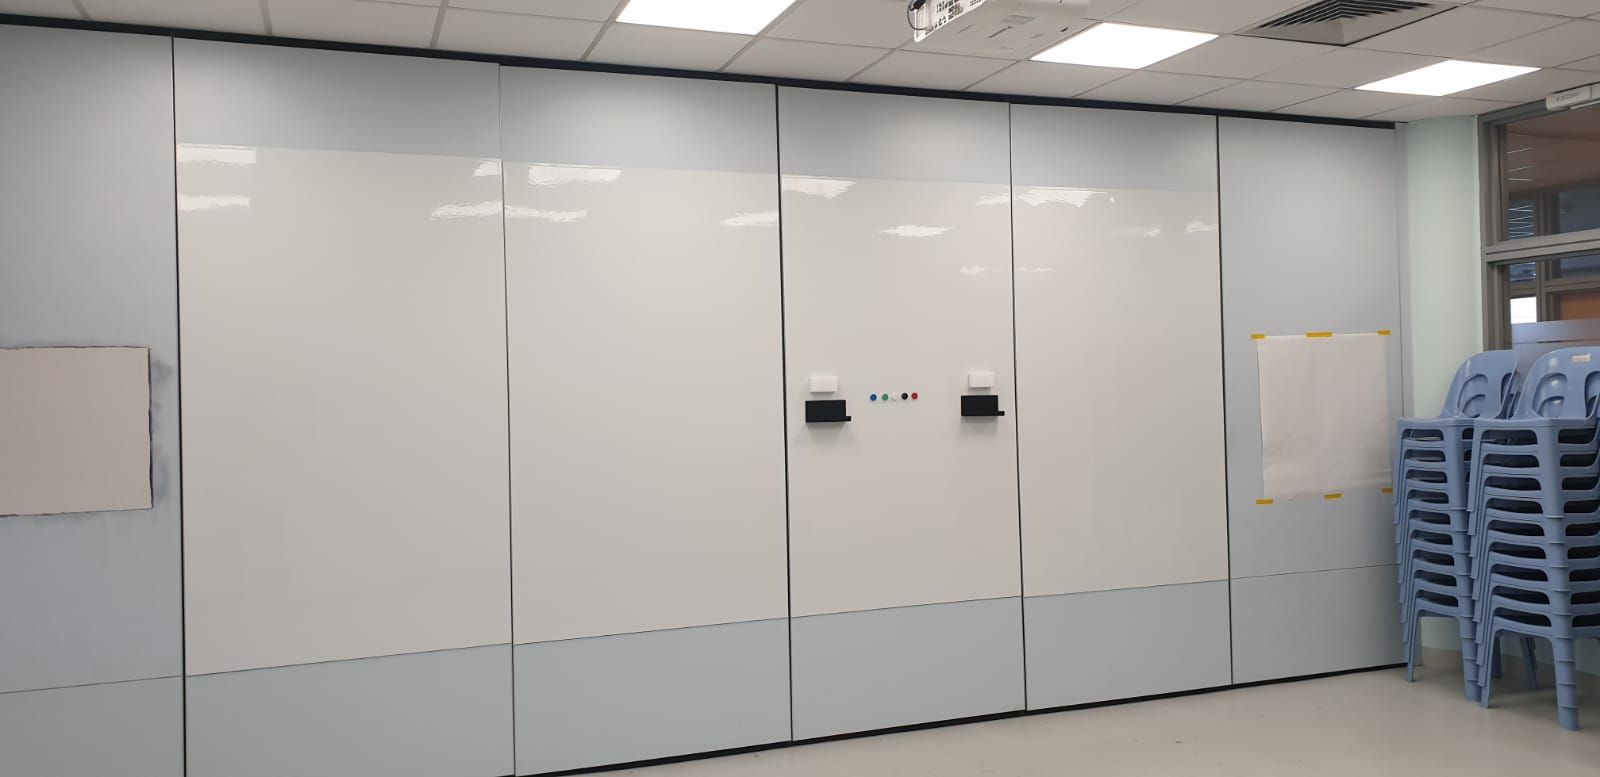 Magnetic whiteboard on hall partition walls